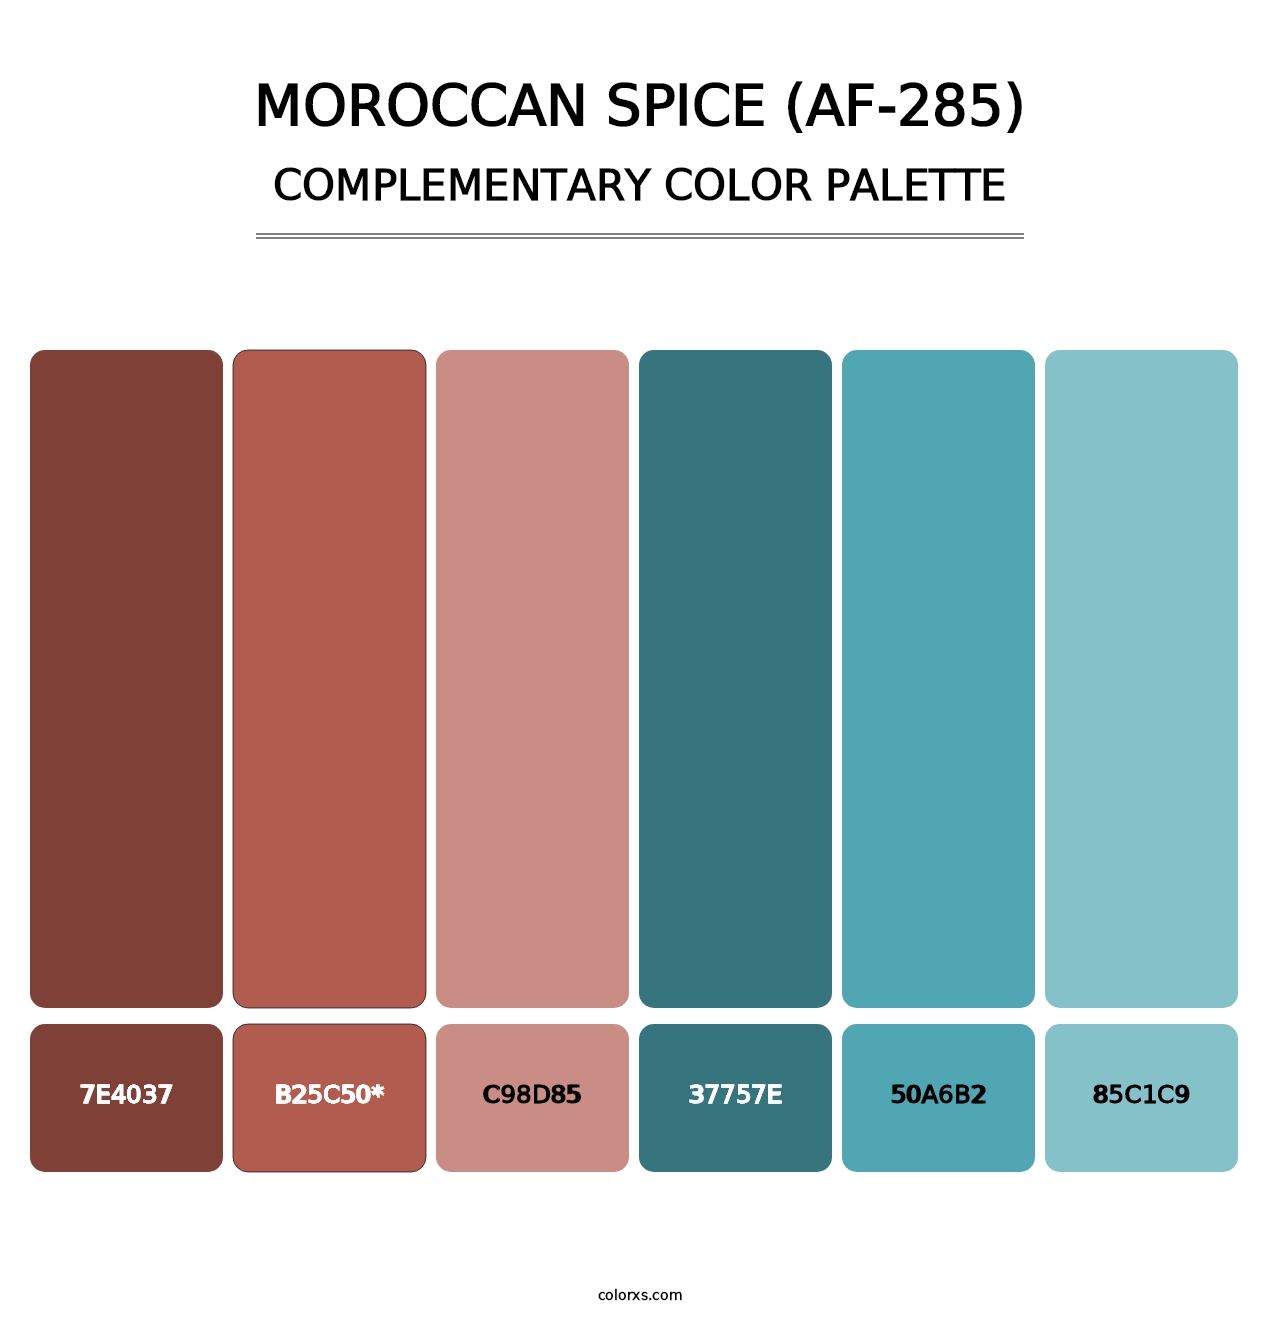 Moroccan Spice (AF-285) - Complementary Color Palette